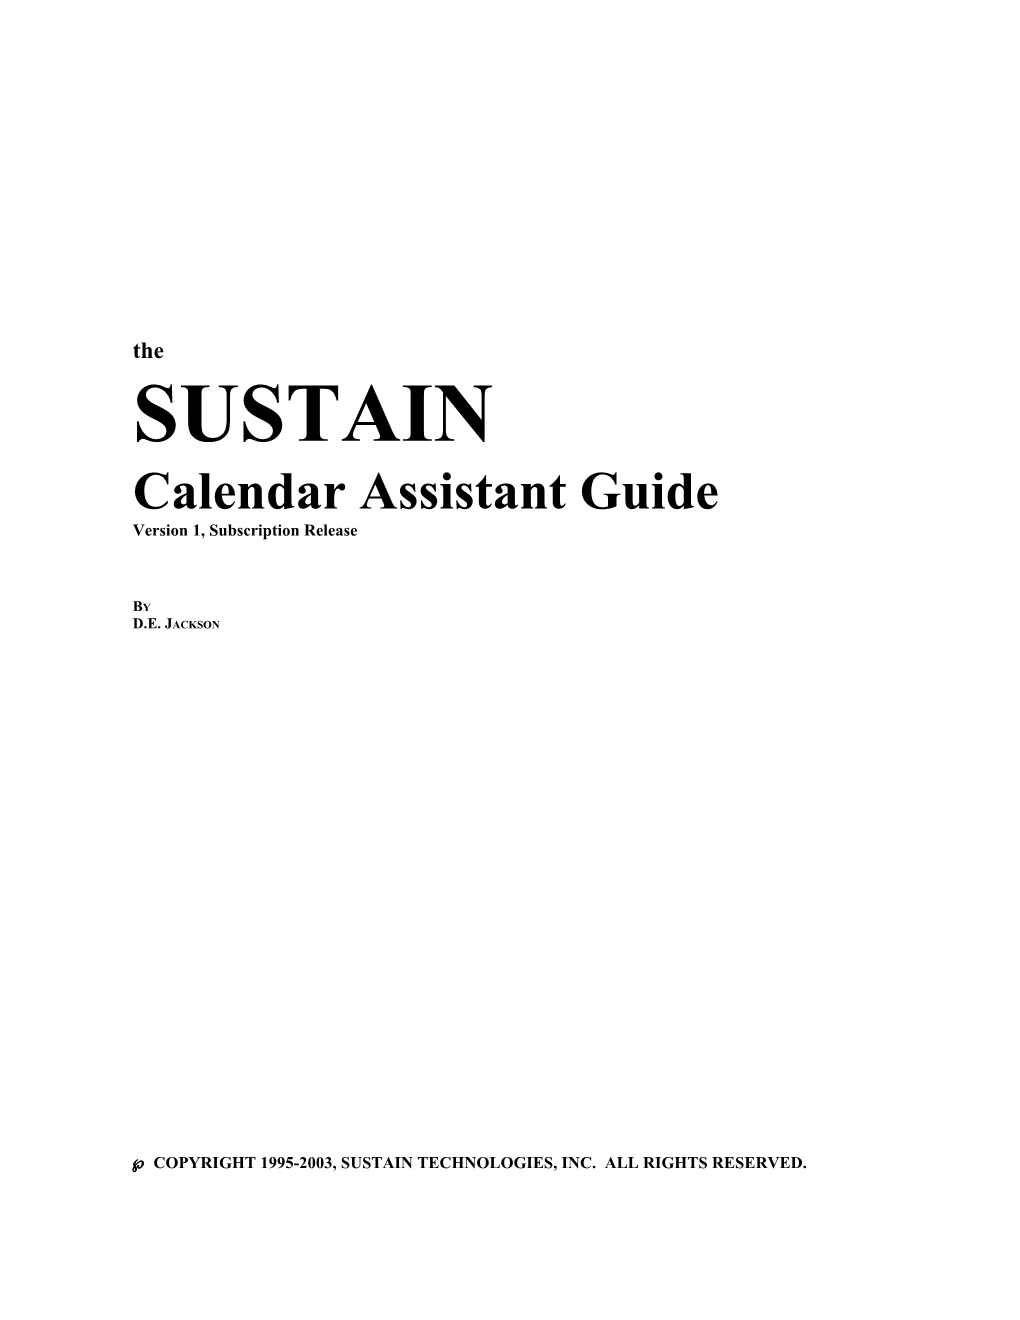 The SUSTAIN Calendar Assistant Guide